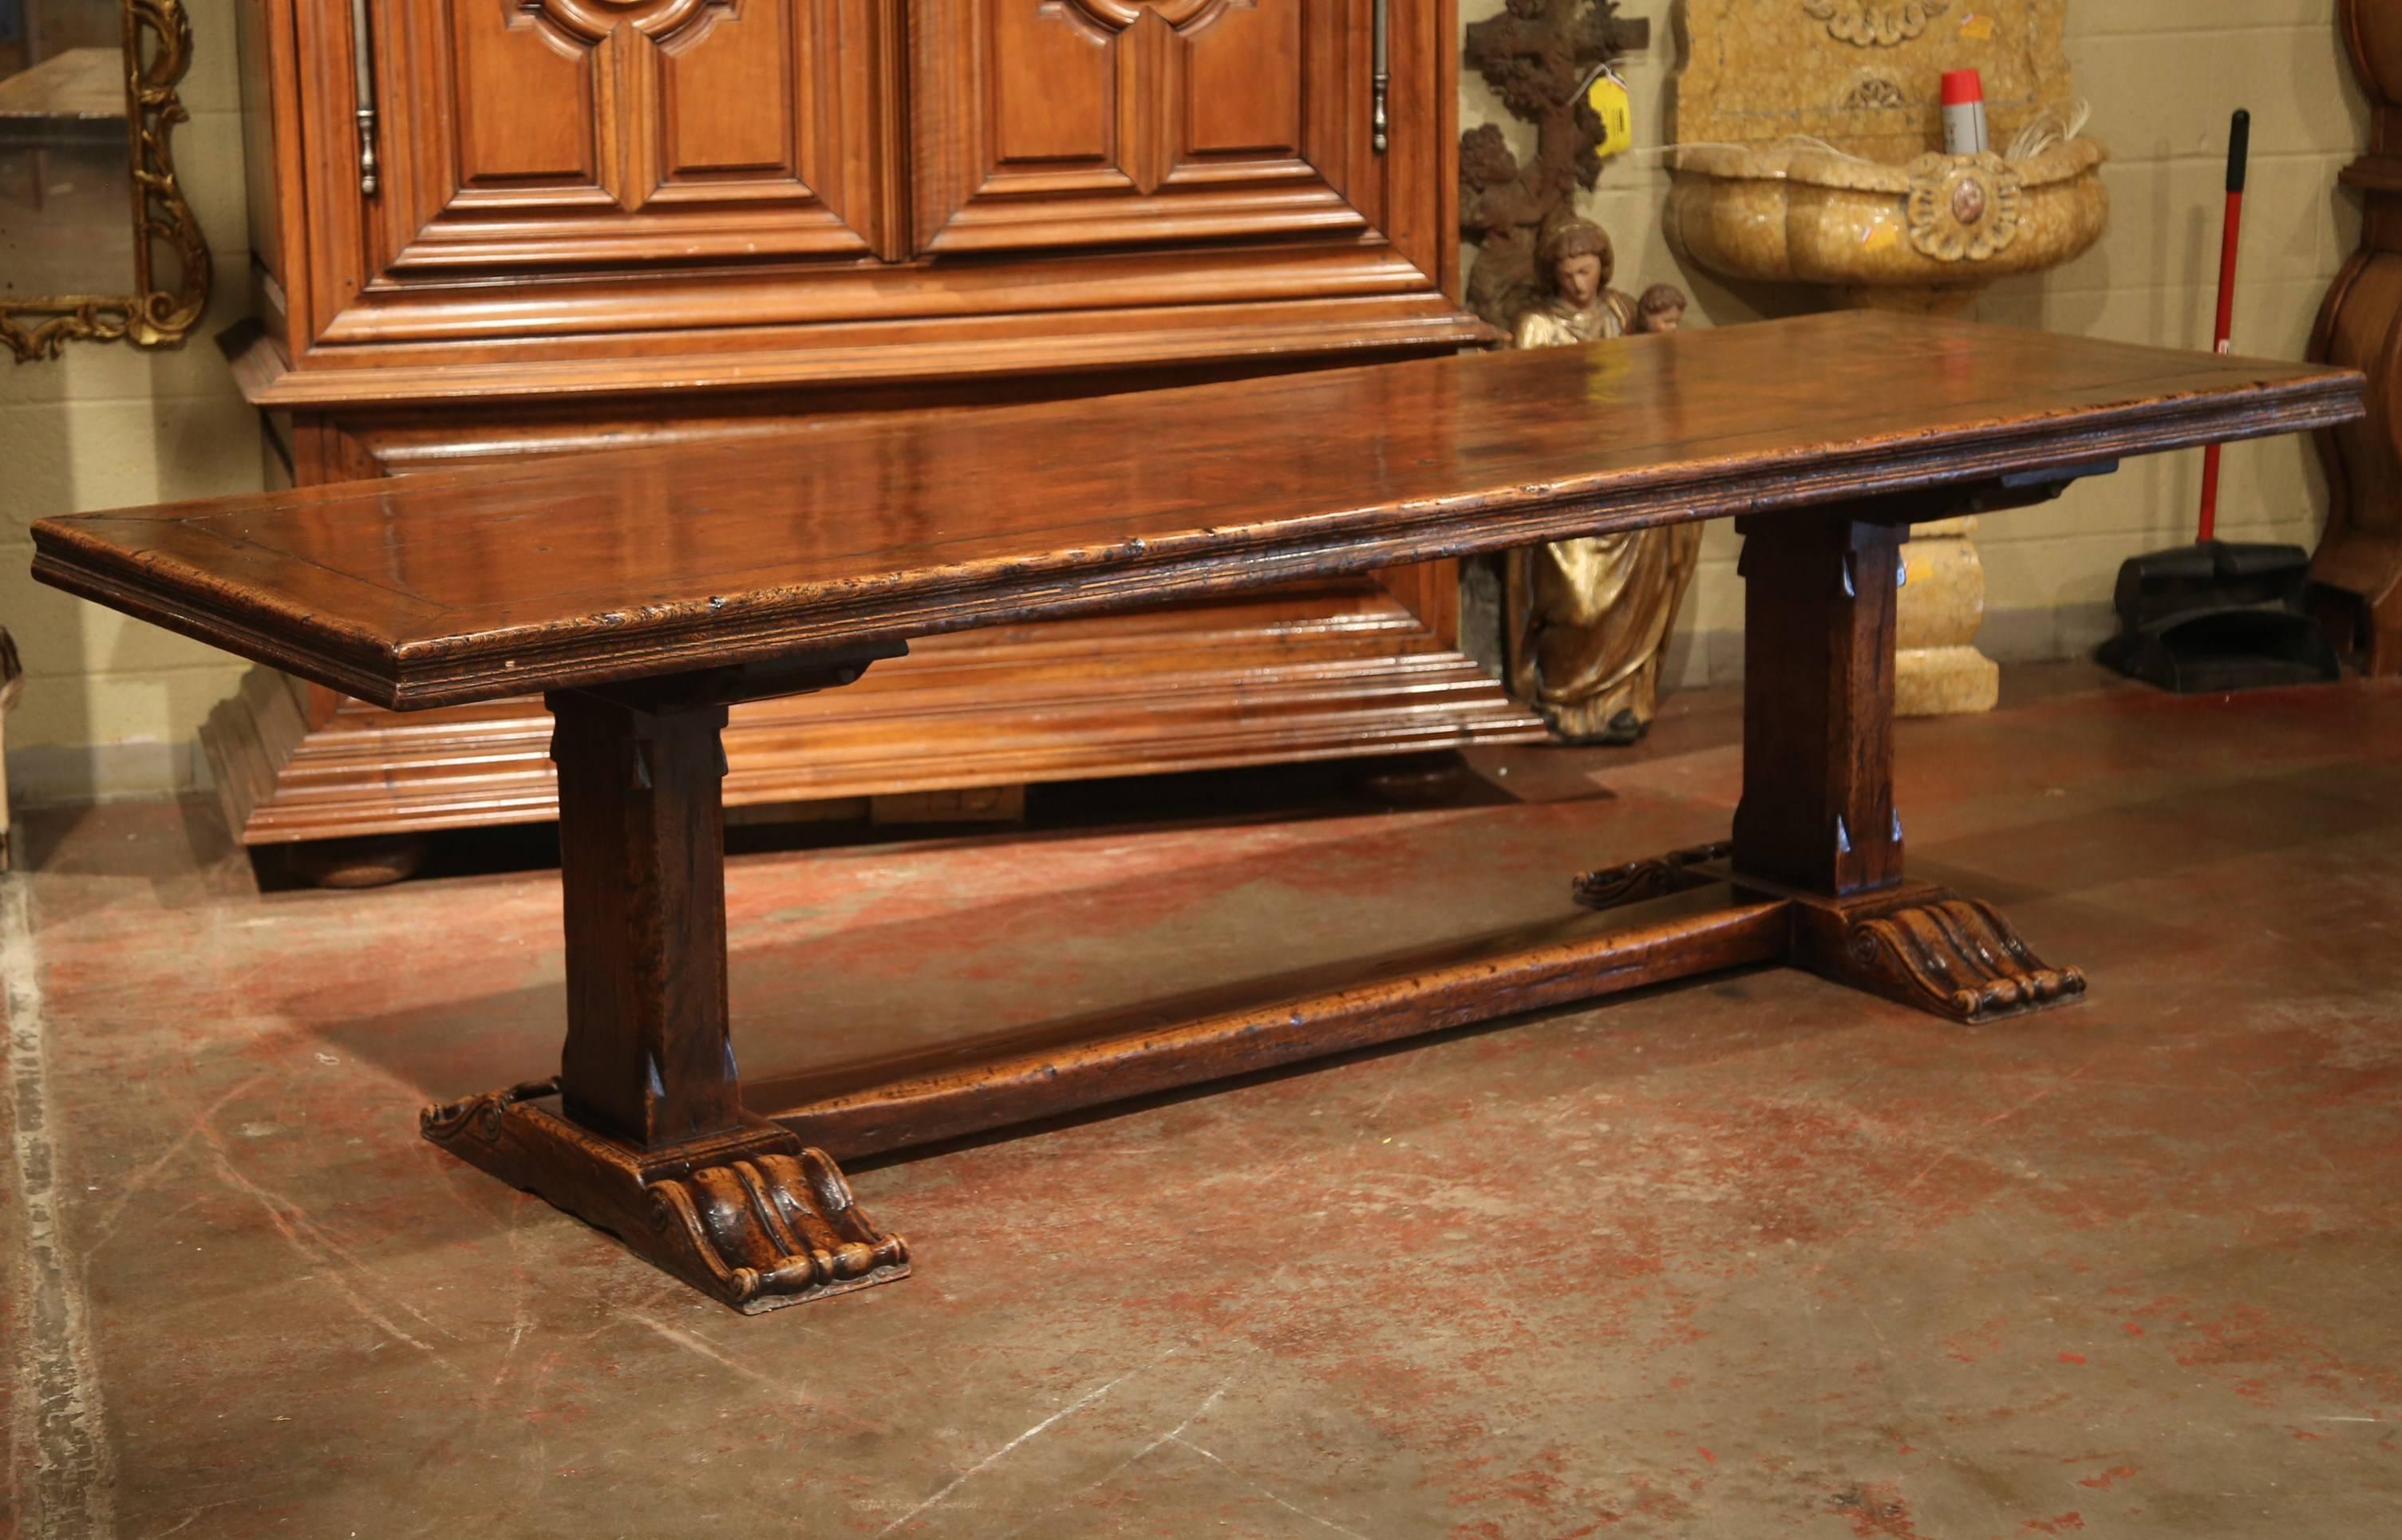 Louis XIII French Carved Chestnut and Oak Trestle Dining Table from the Pyrenees (Handgeschnitzt)